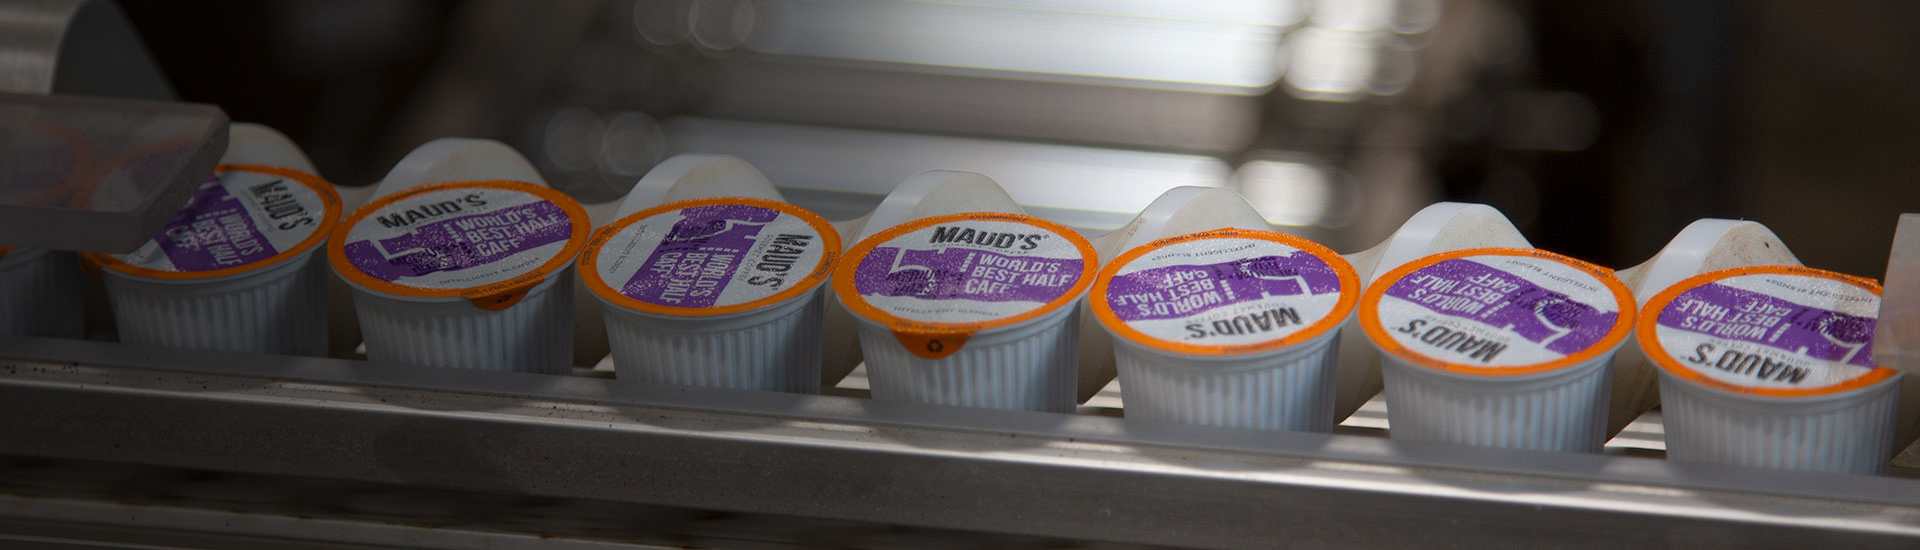 Maud's K-Cups on the production line